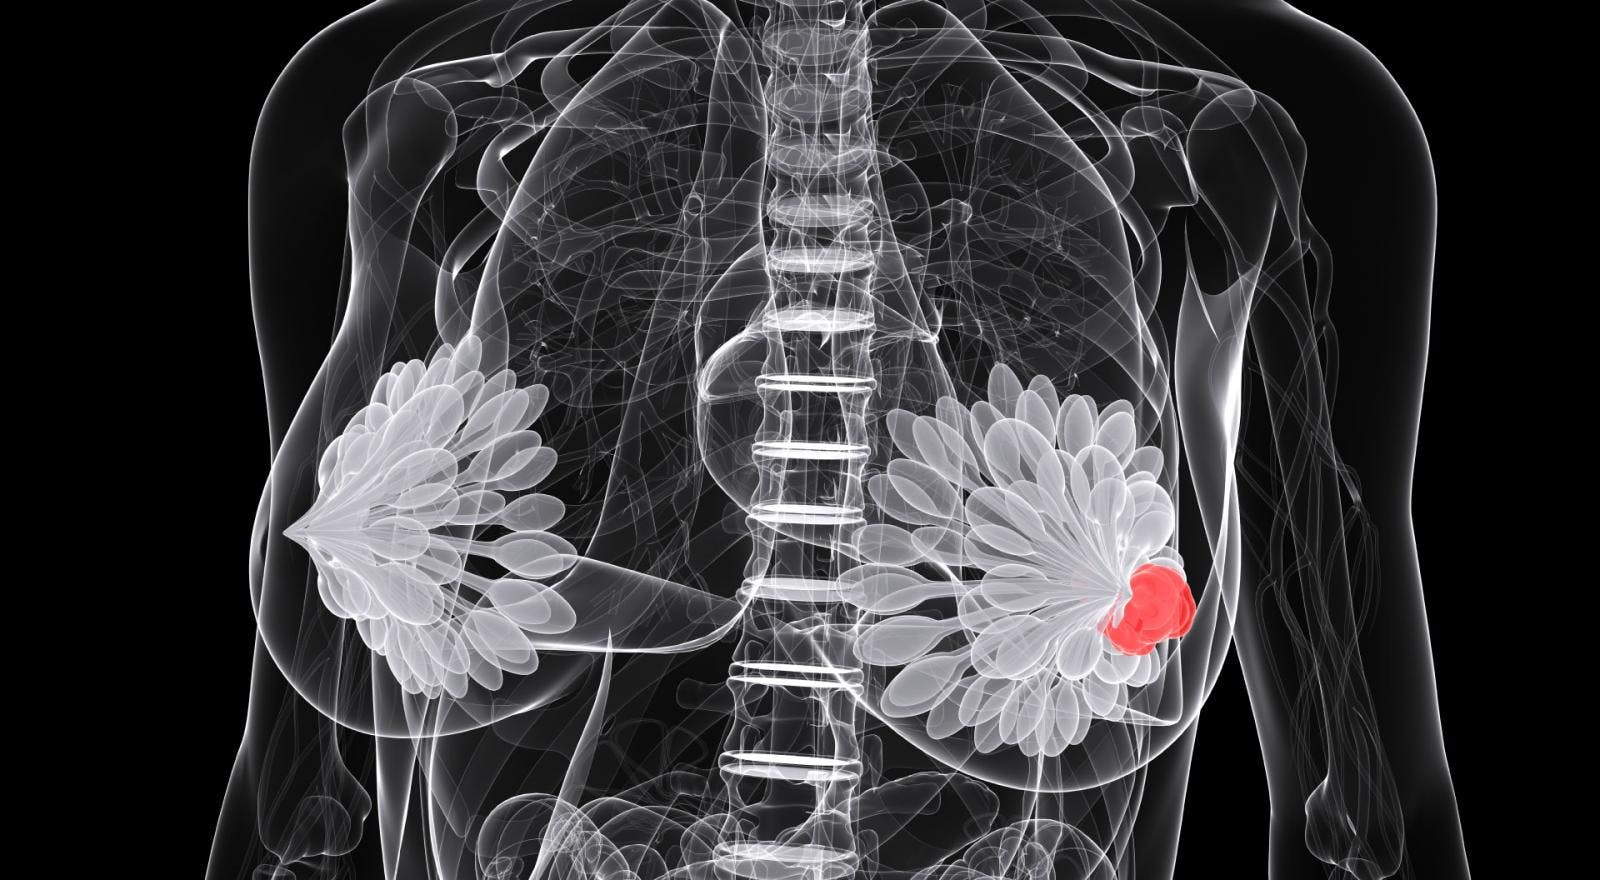 Image of an x-ray of a breast with a tumor.